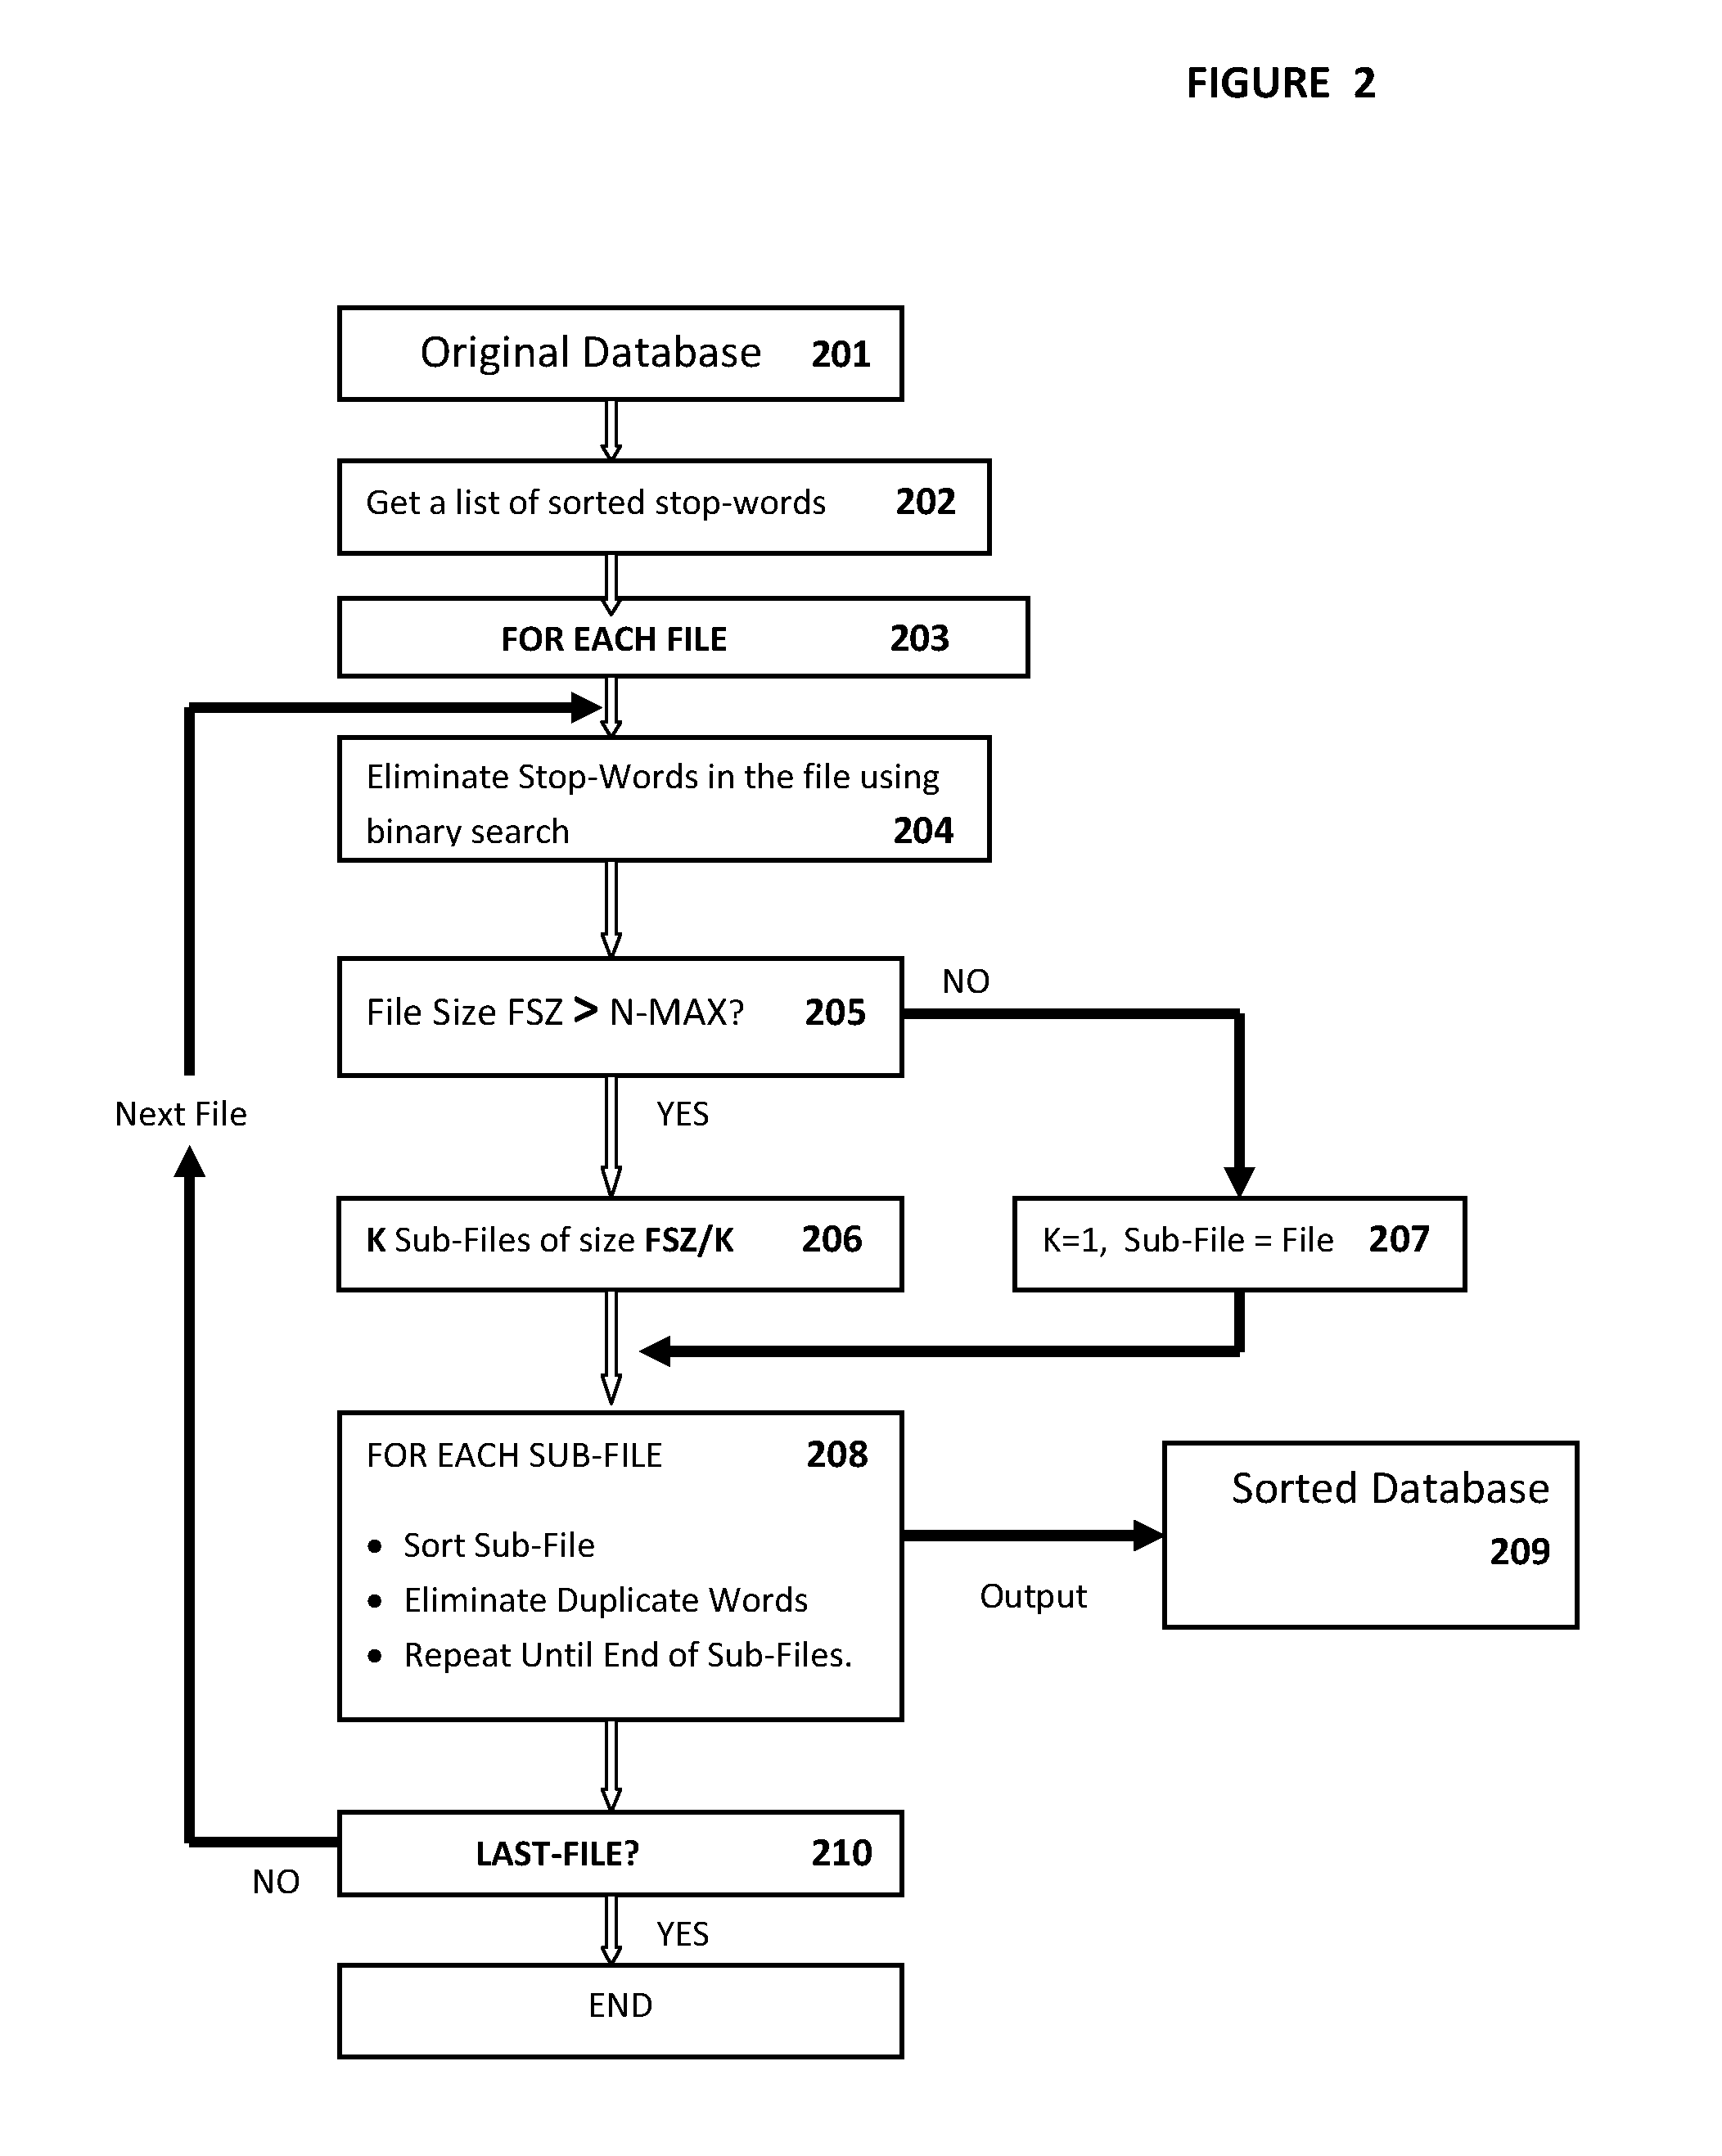 Apparatus and method for information access, search, rank and retrieval